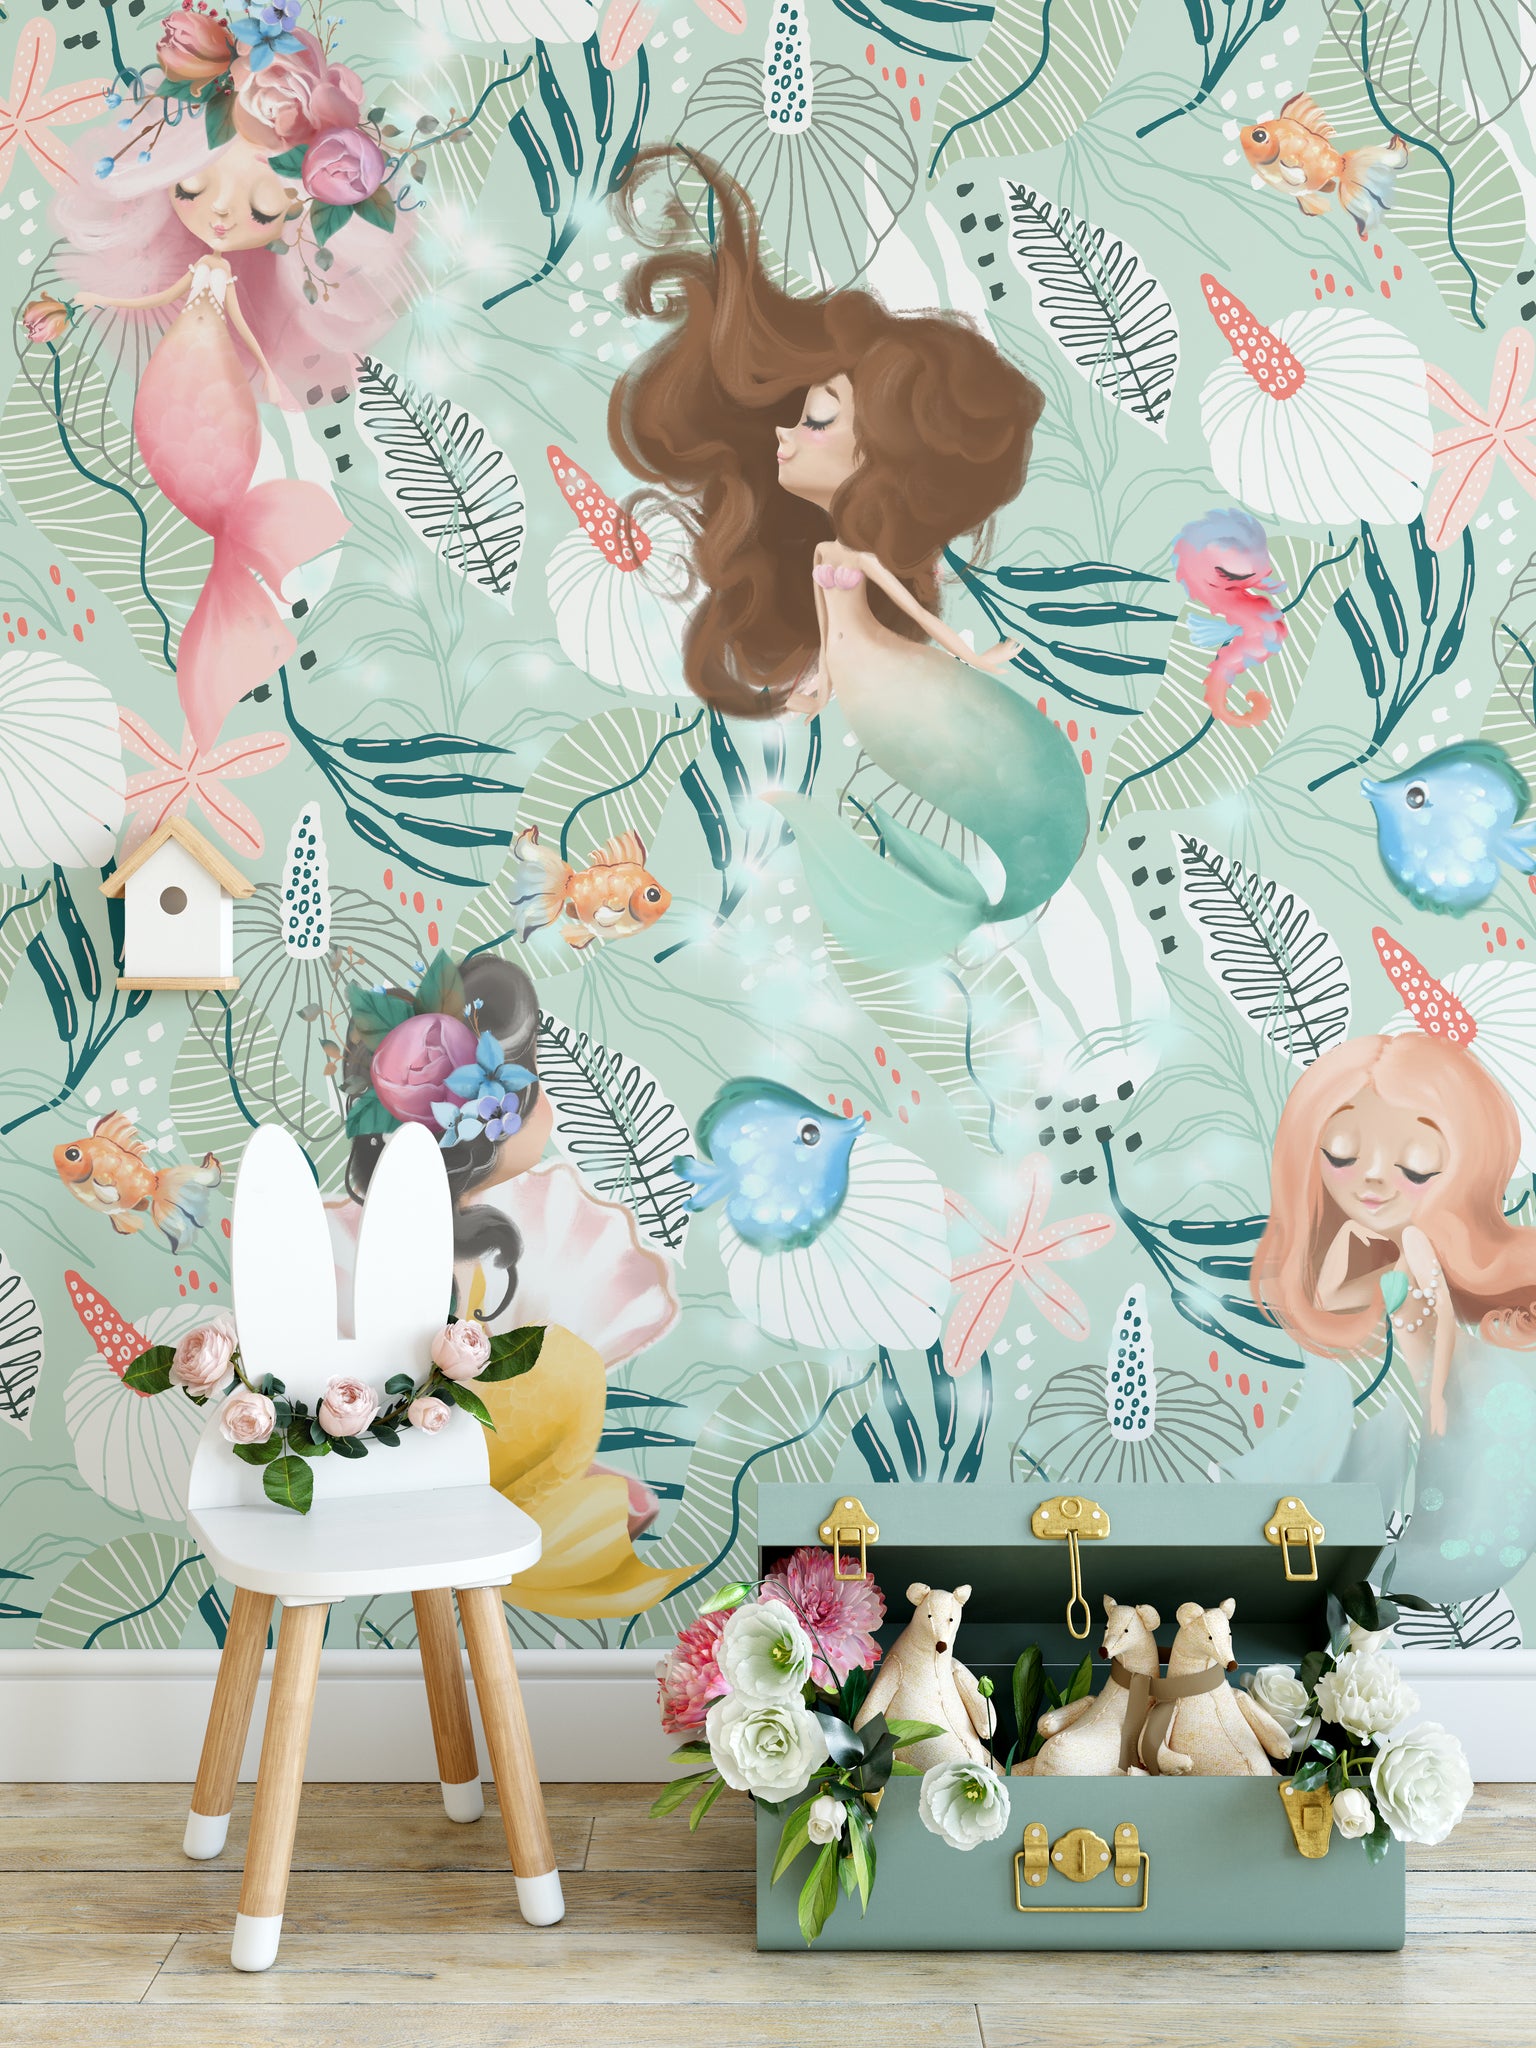 Blue Marine Plants and Mermaids Removable Wallpaper  24 inch x 10ft   Overstock  31602414  Marine plants Mermaid wallpapers Ocean plants